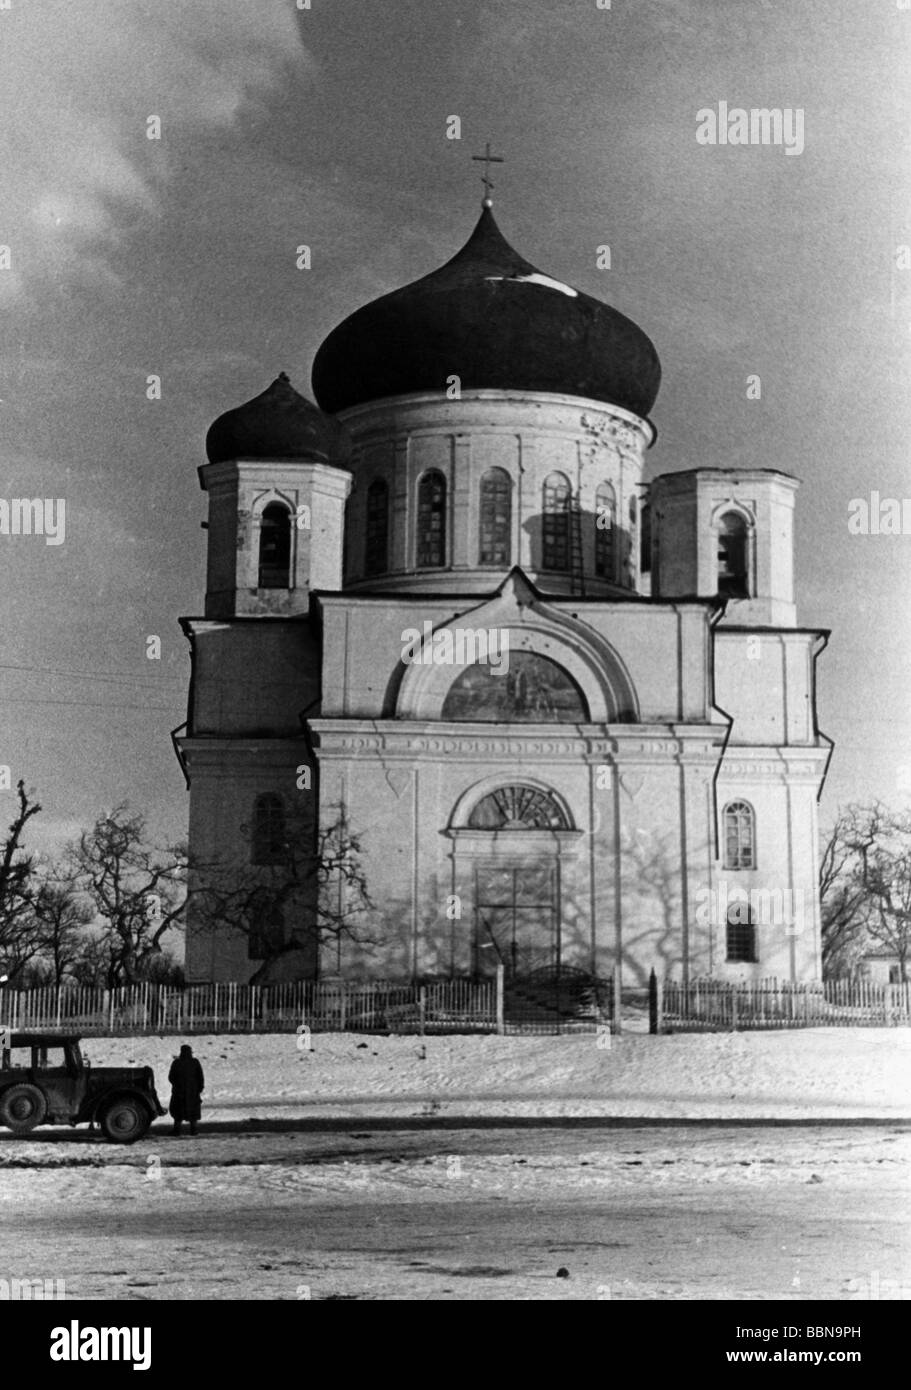 events, Second World War / WWII, Russia 1944 / 1945, church at 'Krassnekoje' (possibly Kraznoye), damaged during fightings, 2.3.1944, Stock Photo